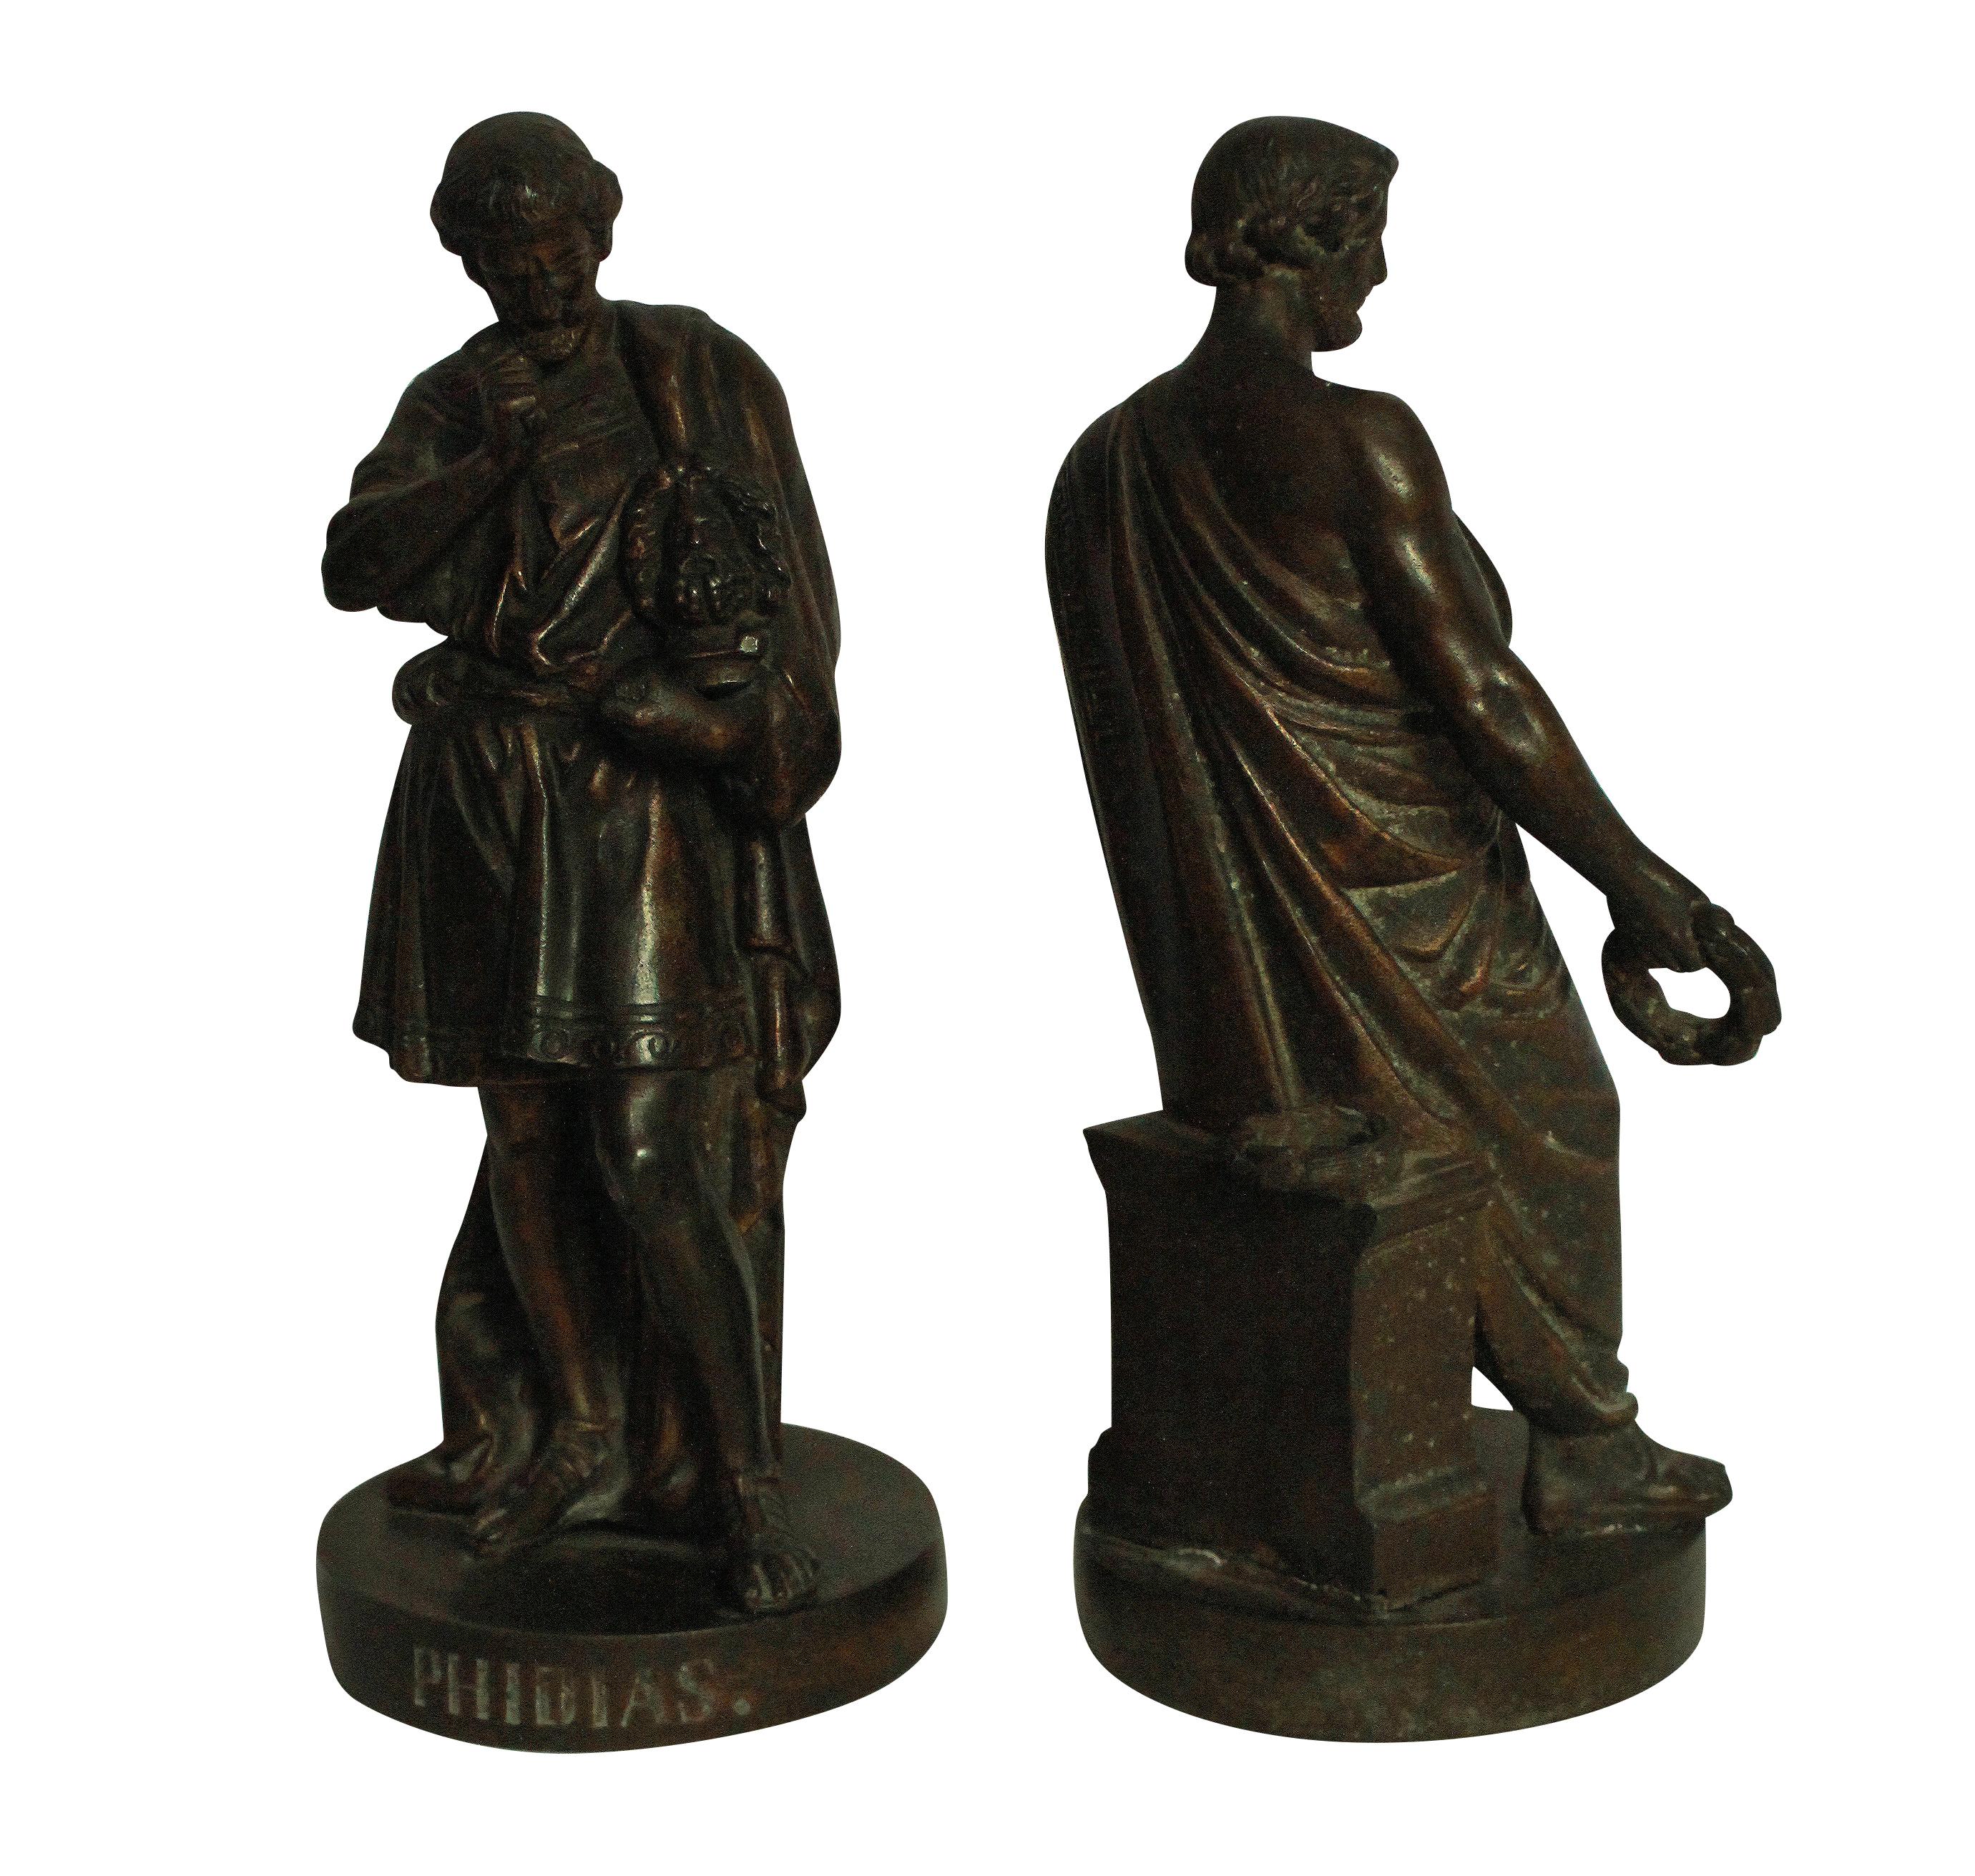 A pair of English bronze statues of the Greek statesman Pericles and the architect Phidias, from the 'Golden Age'.